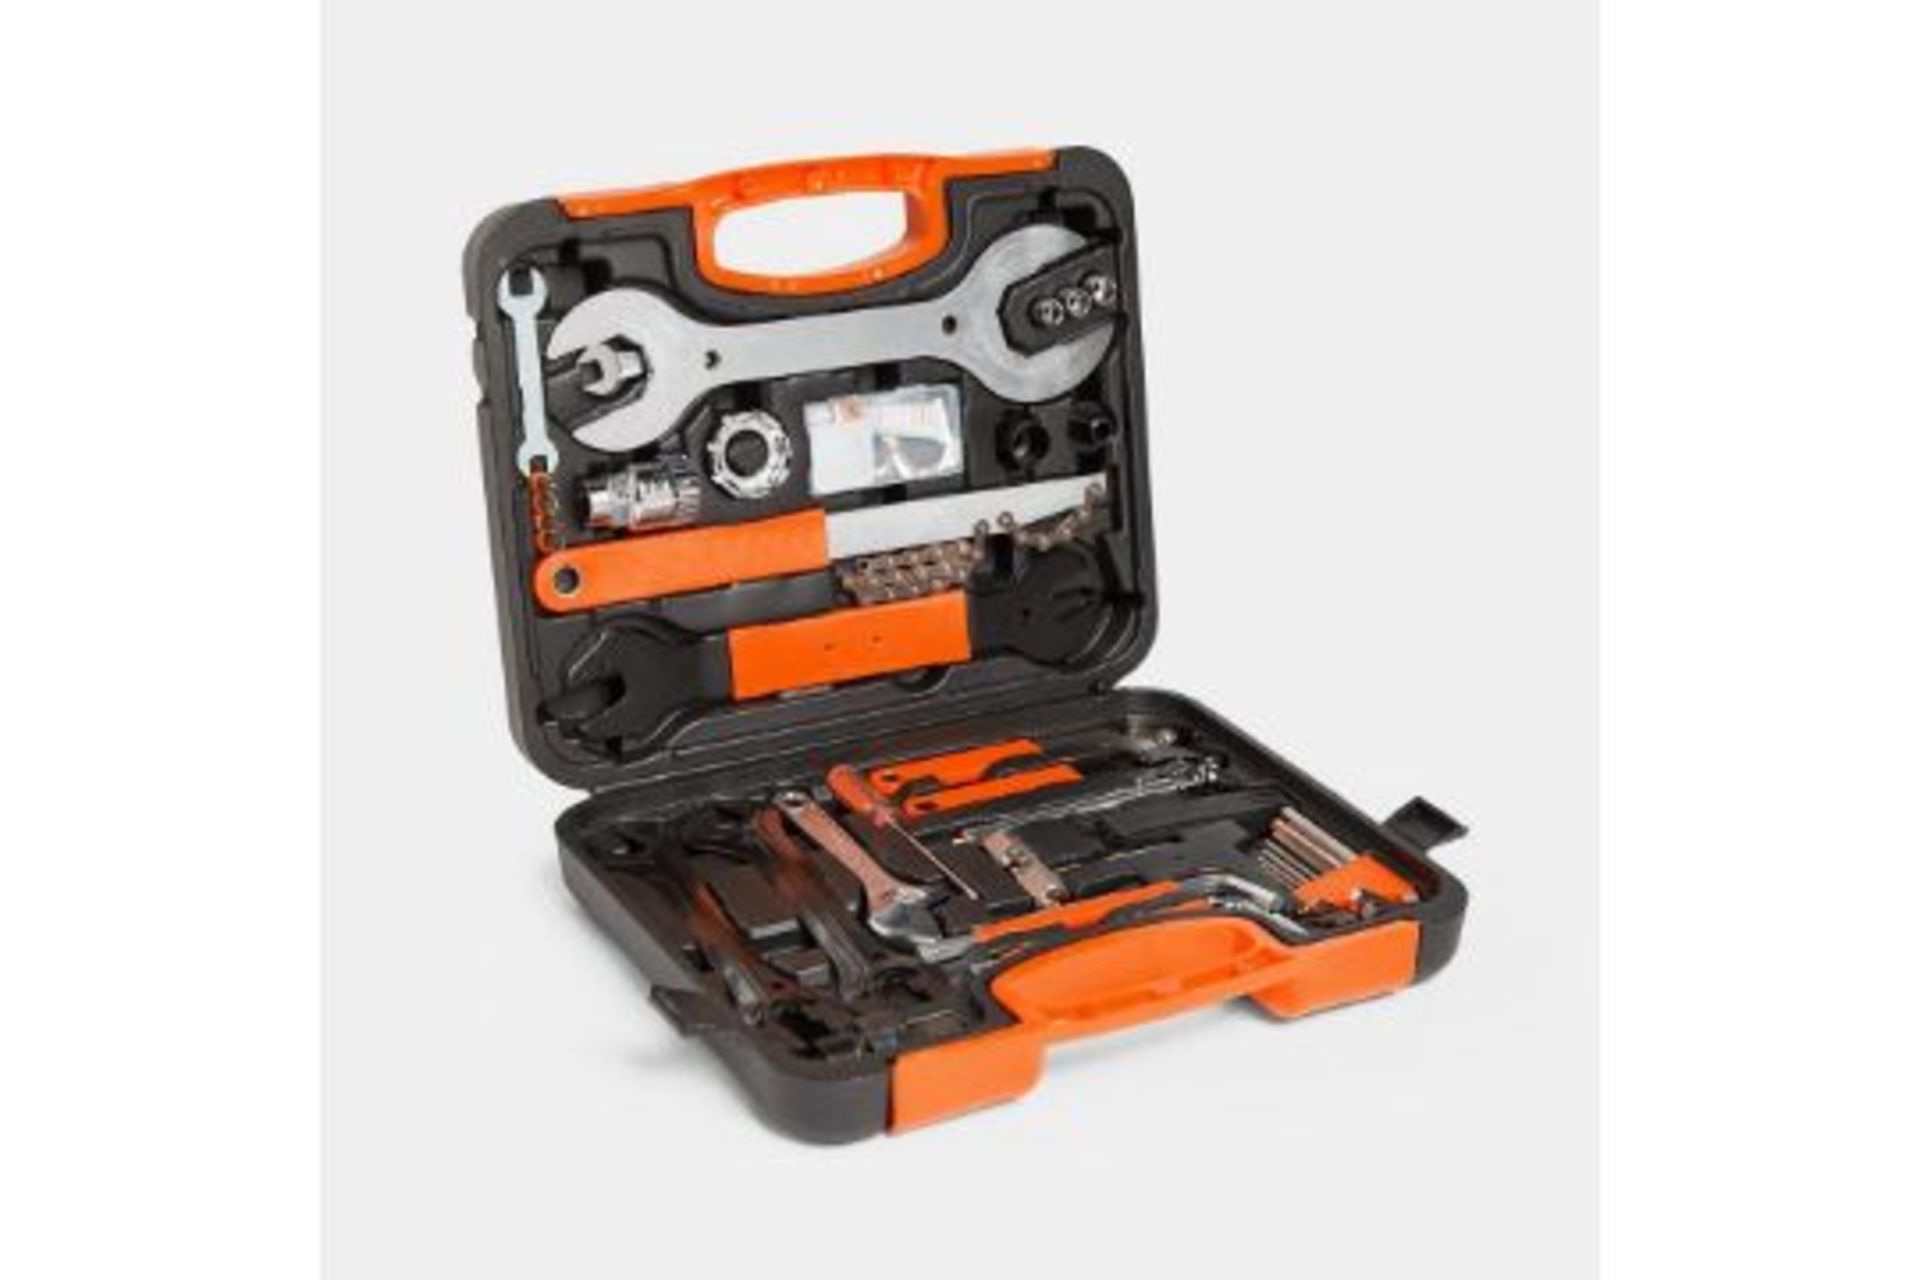 ER51 - Bike Tool KitBe prepared for any bicycle repair situation with our Bike Tool Kit, the